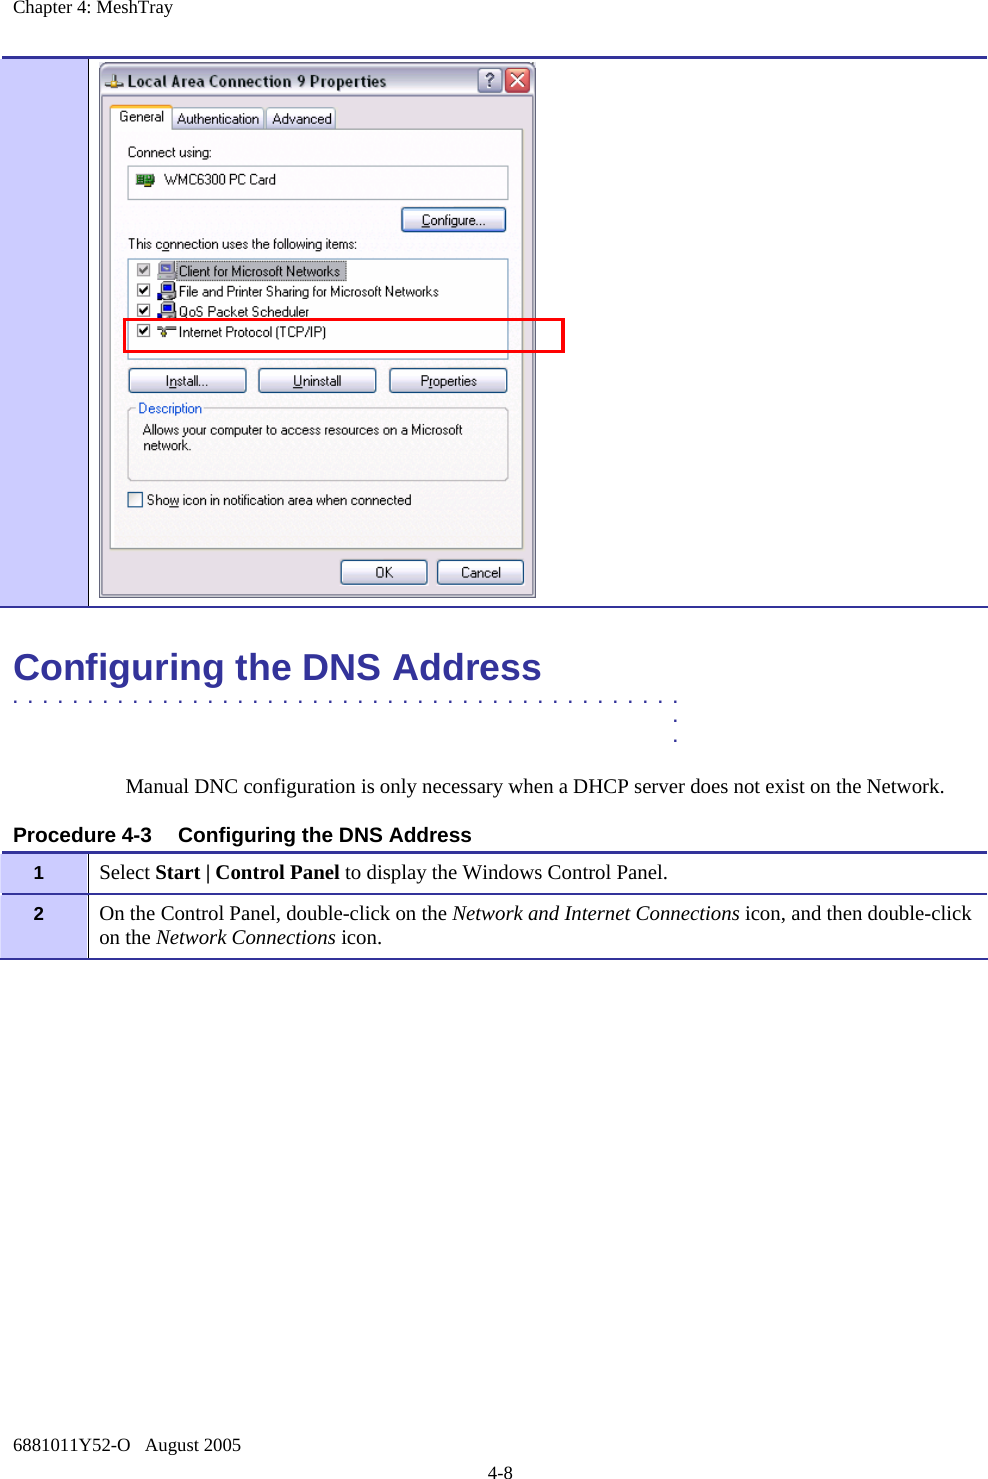 Chapter 4: MeshTray 6881011Y52-O   August 2005 4-8  Configuring the DNS Address .............................................  .   . Manual DNC configuration is only necessary when a DHCP server does not exist on the Network. Procedure 4-3  Configuring the DNS Address 1   Select Start | Control Panel to display the Windows Control Panel. 2   On the Control Panel, double-click on the Network and Internet Connections icon, and then double-click on the Network Connections icon. 